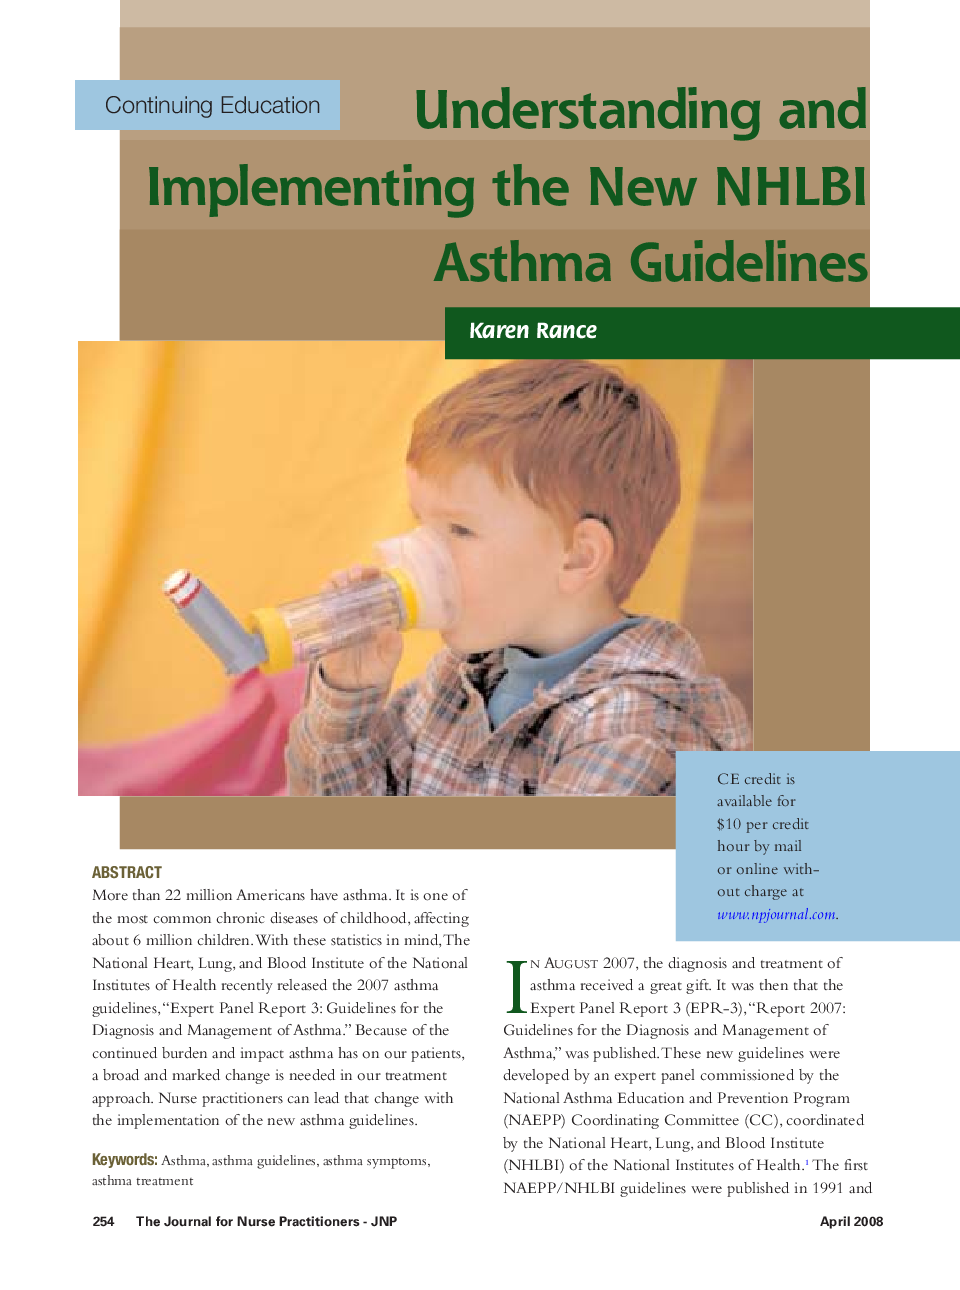 Understanding and Implementing the New NHLBI Asthma Guidelines